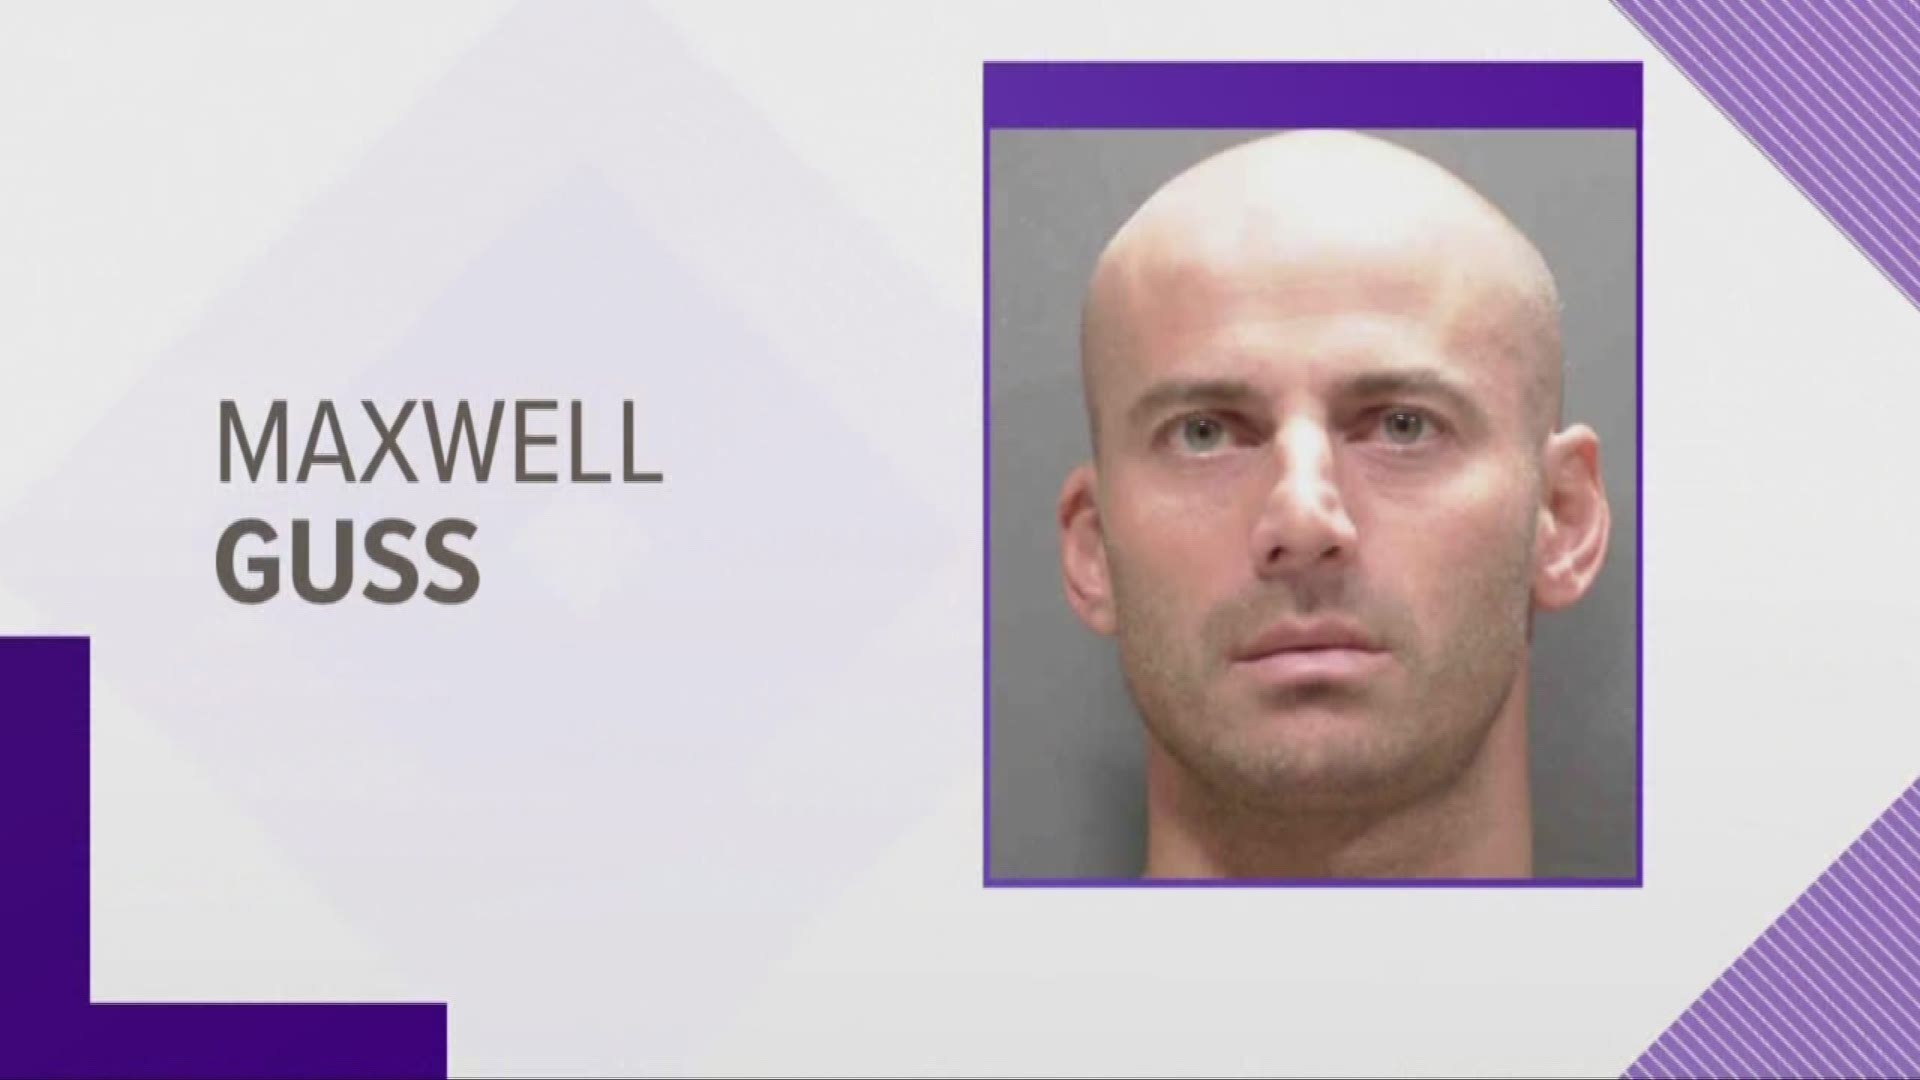 Police say Maxwell Guss inappropriately touched two students at Brooksville Middle School.